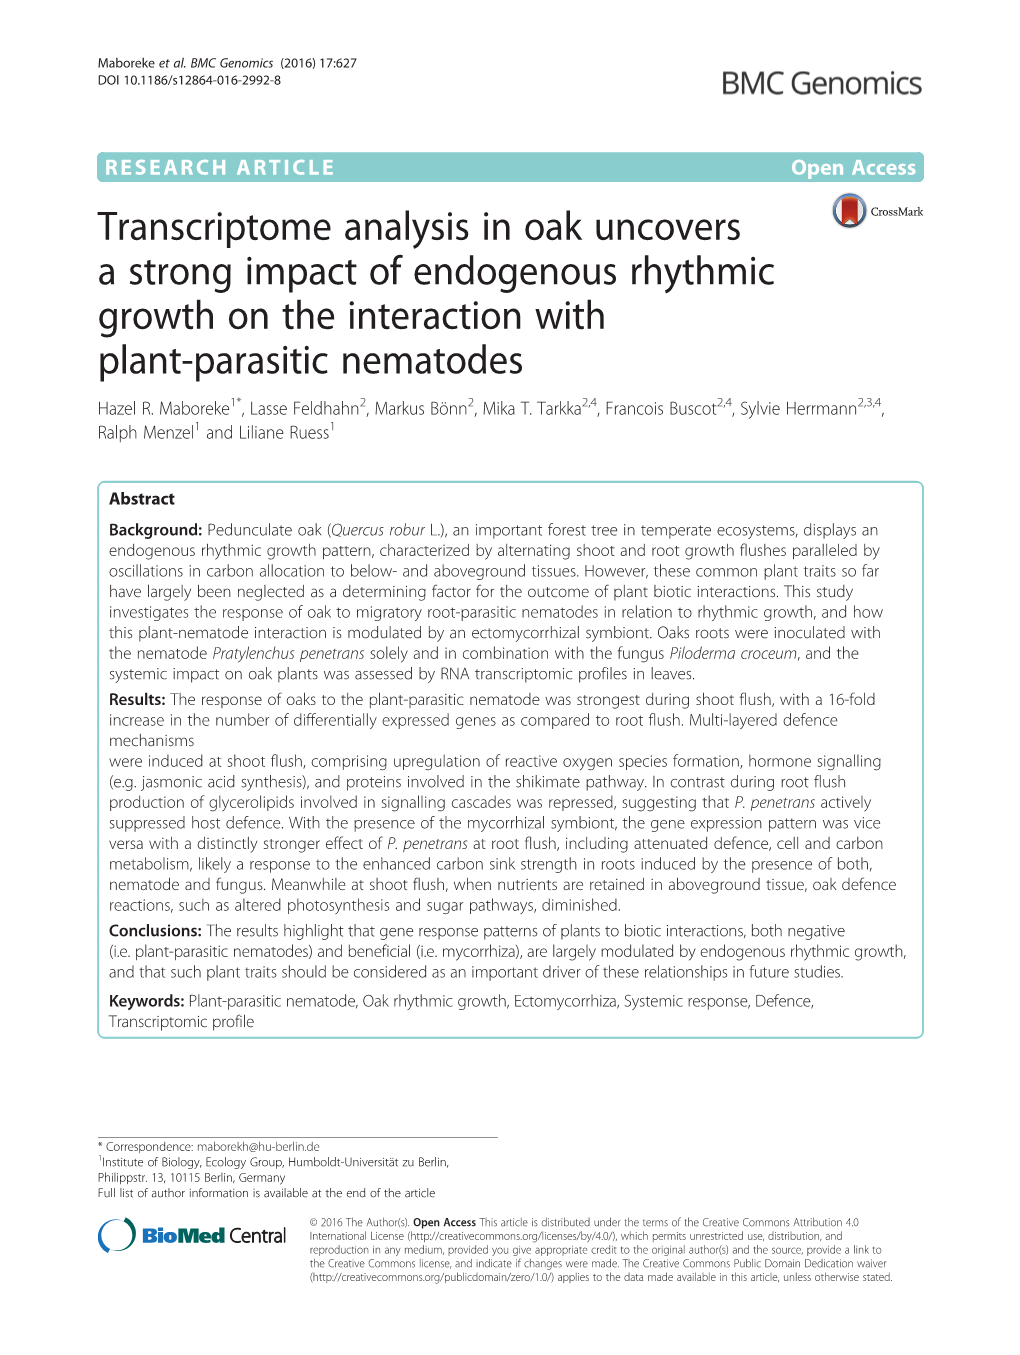 Transcriptome Analysis in Oak Uncovers a Strong Impact of Endogenous Rhythmic Growth on the Interaction with Plant-Parasitic Nematodes Hazel R